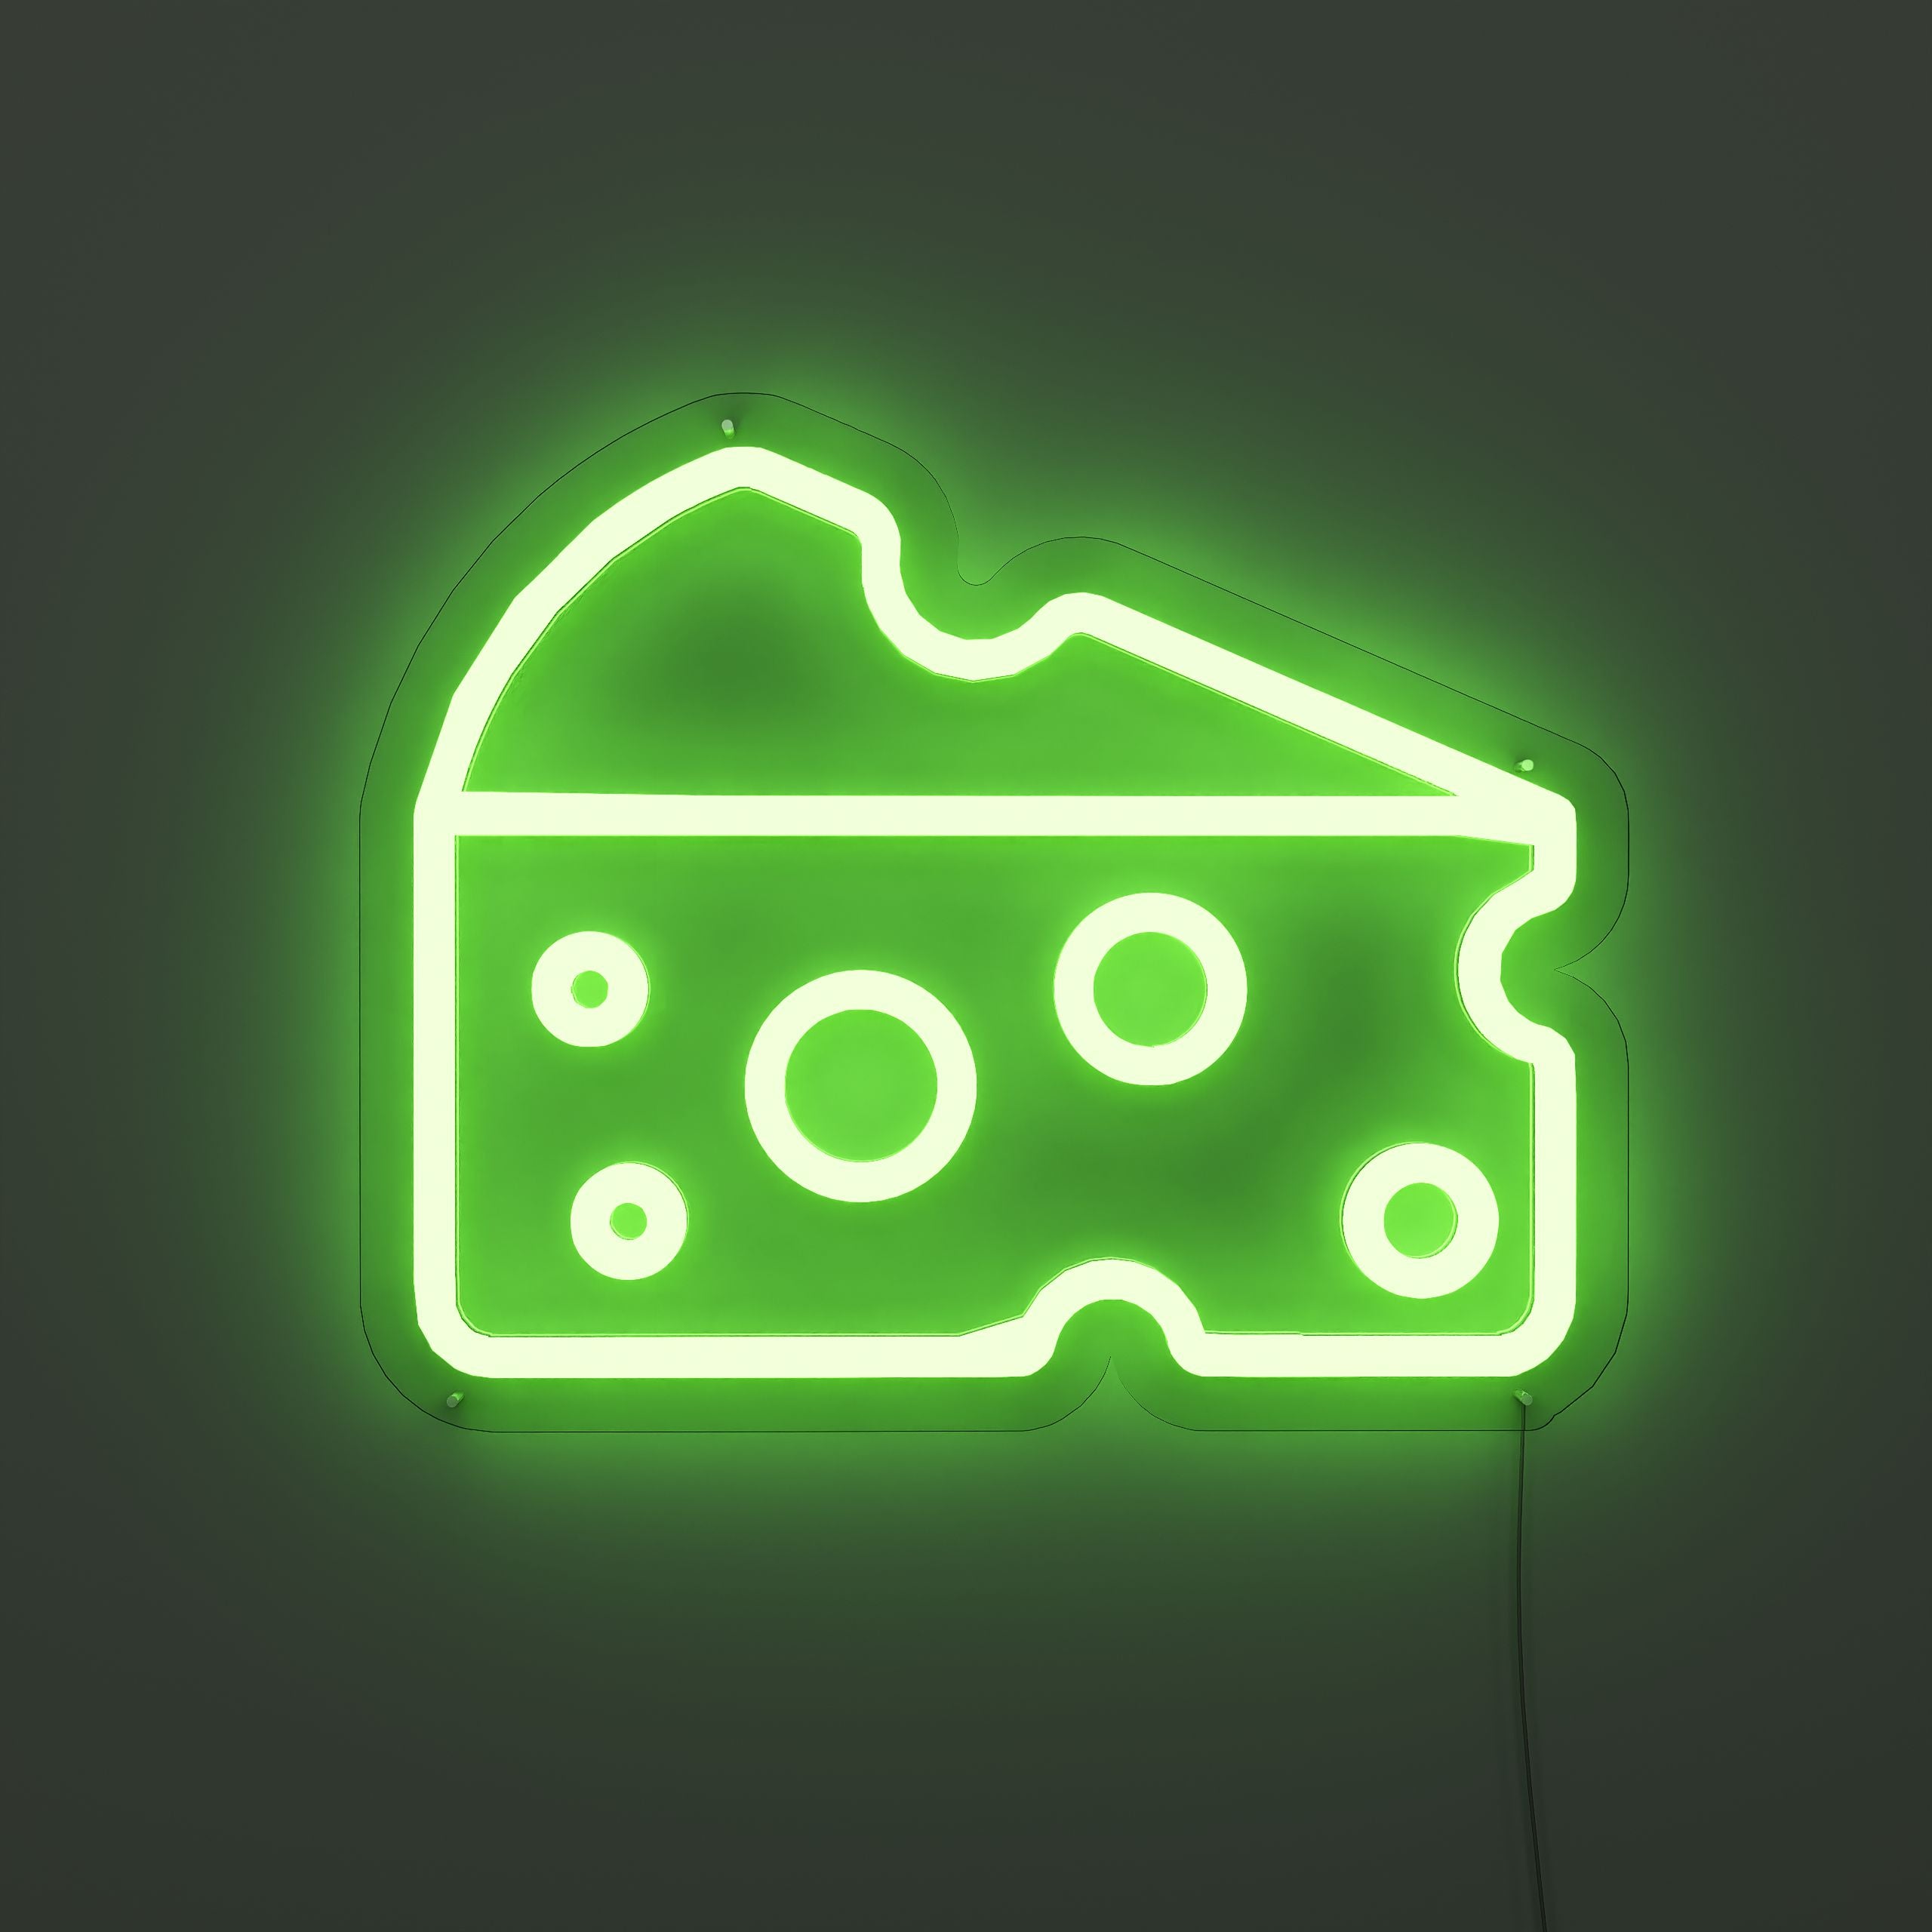 Delightful-Cheese-Mix-Neon-Sign-Lite